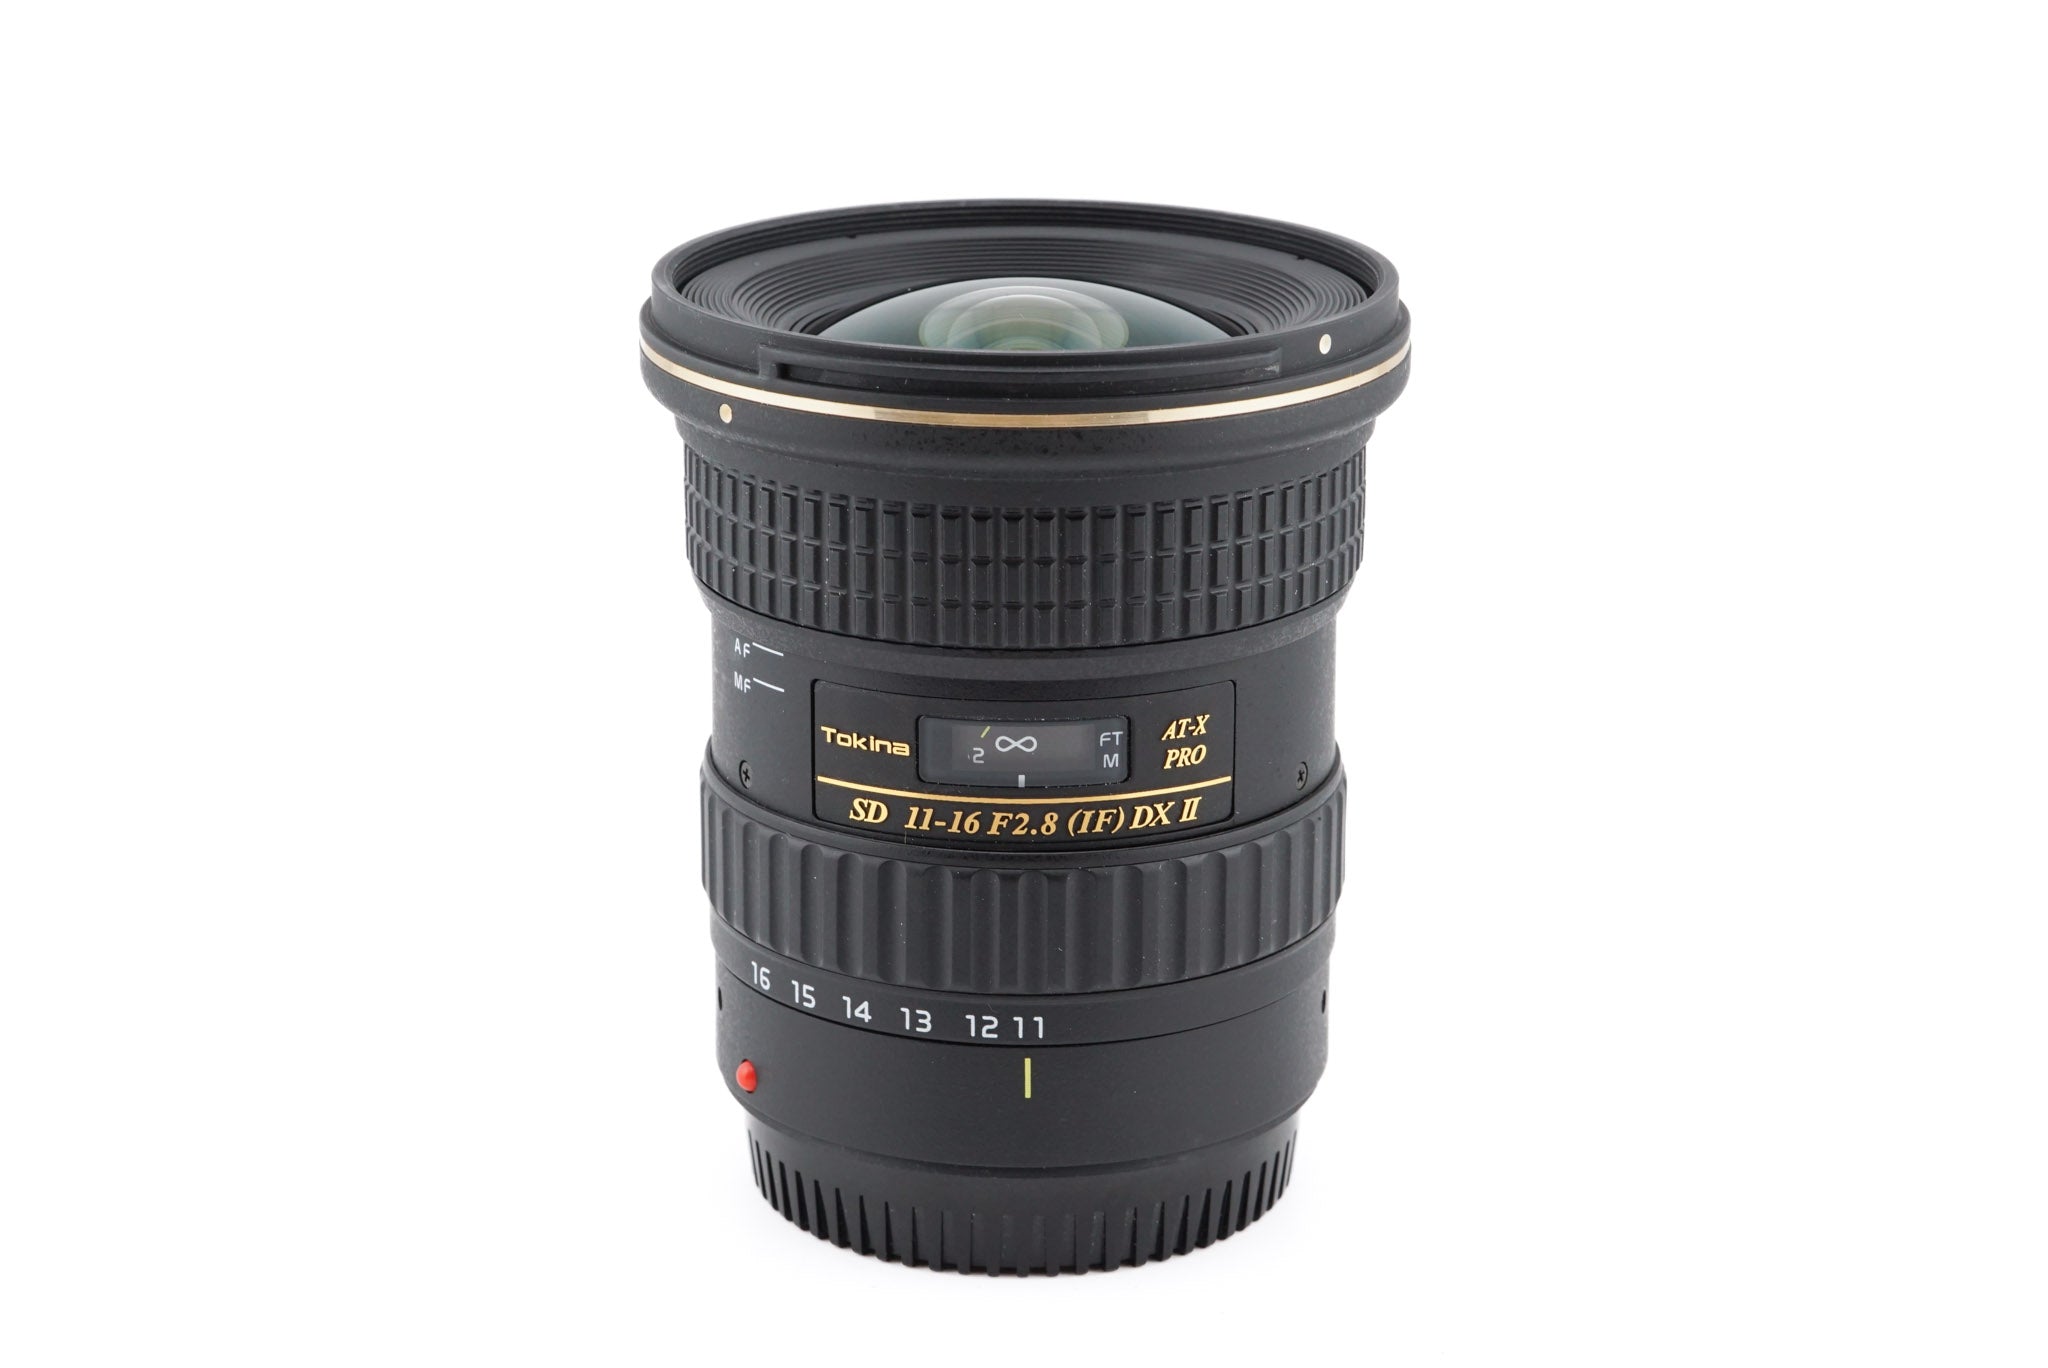 Tokina AT-X PRO SD 11-16mm F2.8 IF DX-